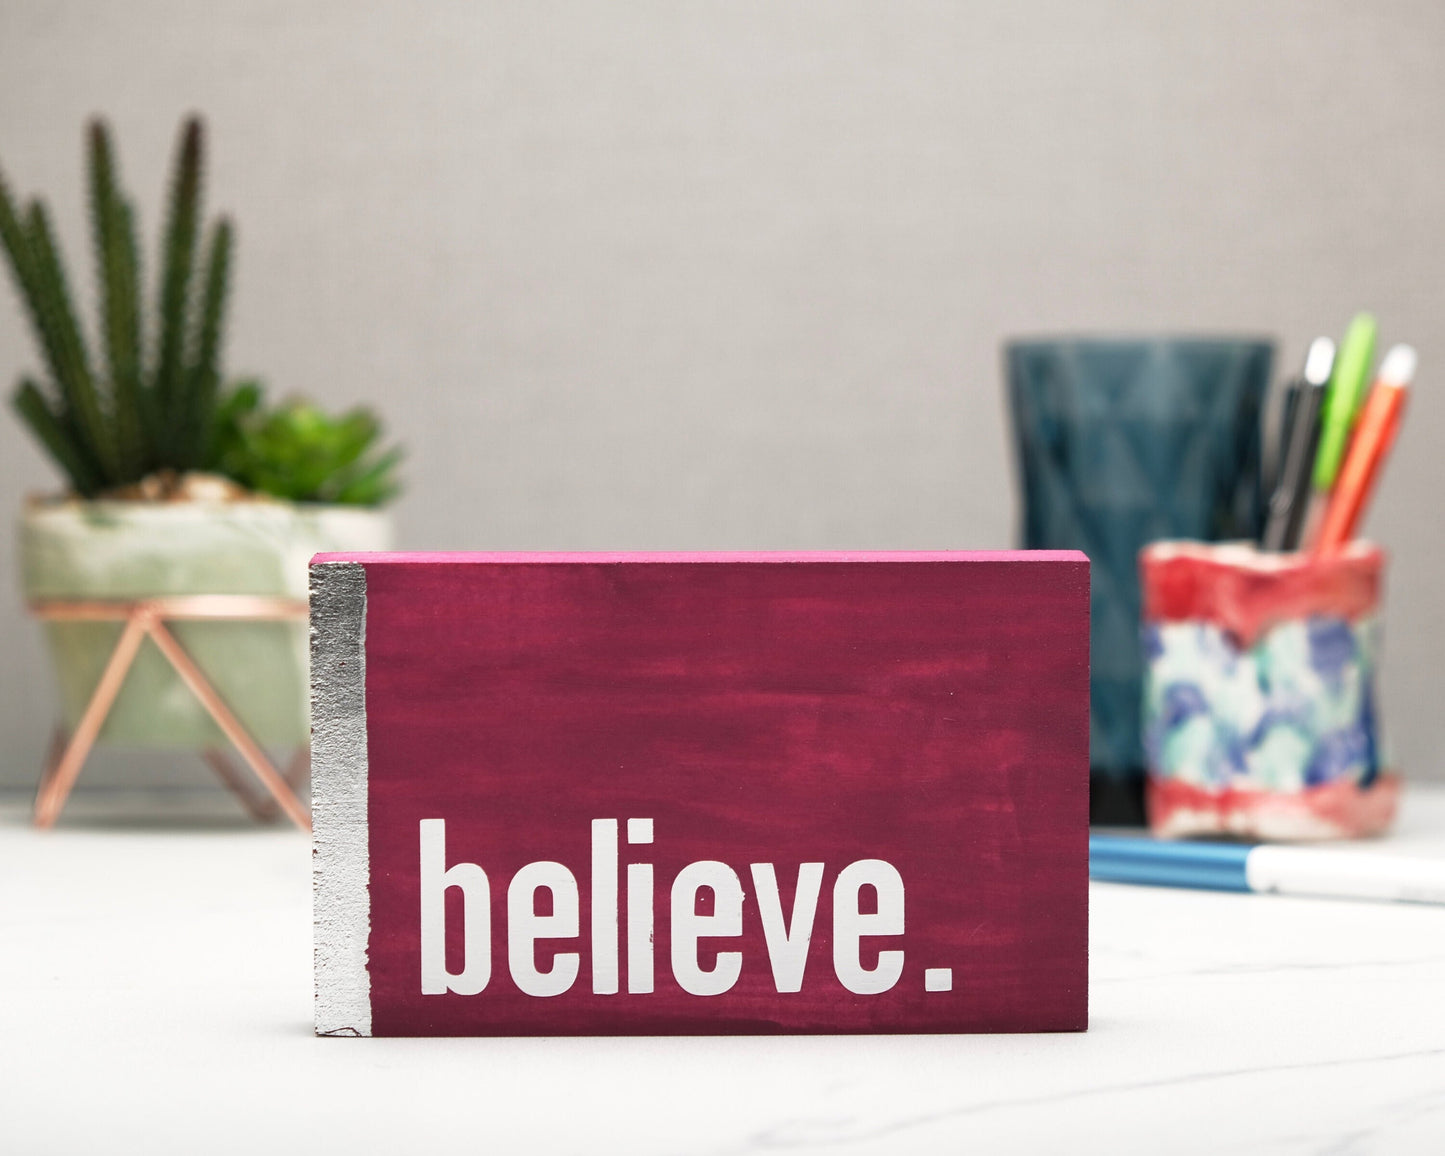 Small freestanding rectangular wooden sign facing straight on. Magenta wood stain with silver vertical border on left side. White painted message in chunky font with full stop, believe. Plant and pen pot out of focus in background.